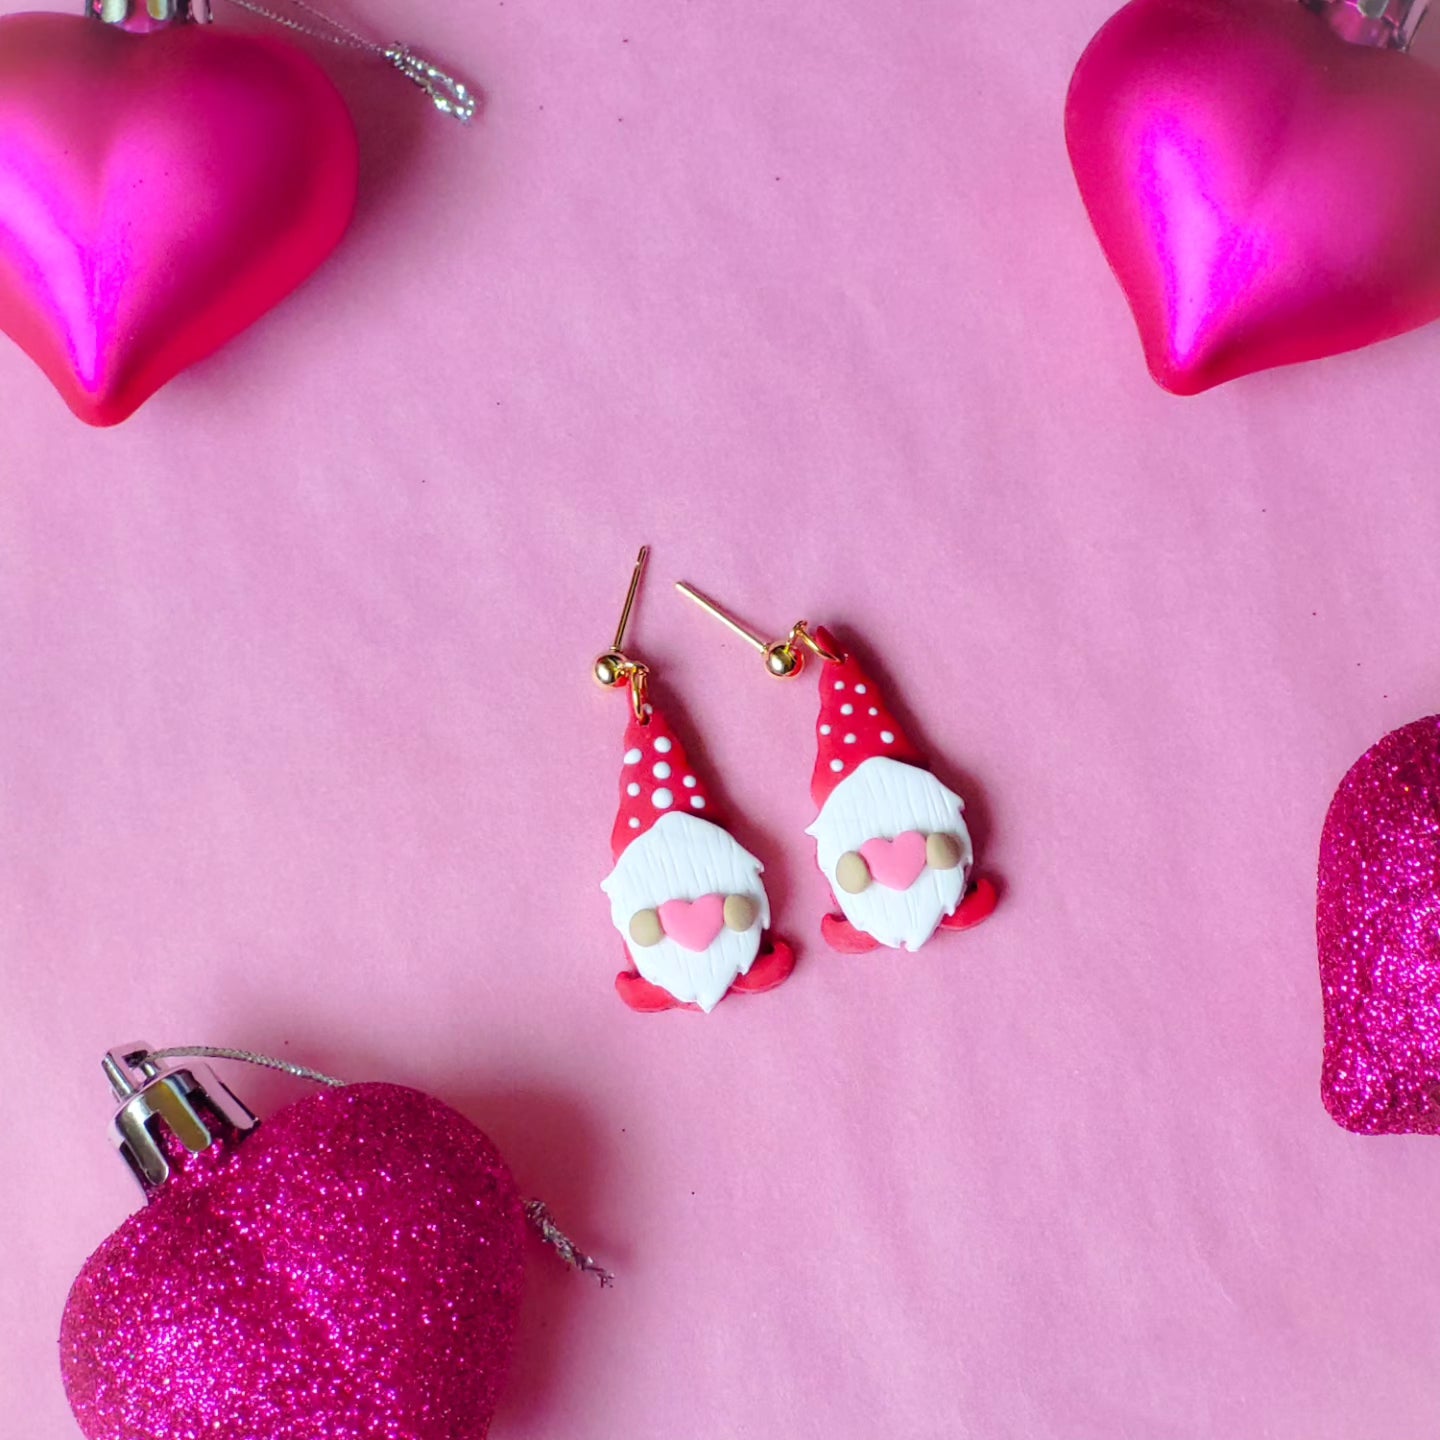 Polymer Clay Valentine Earrings, Valentine Clay Earrings, Valentine Day Earrings, Handmade Earring Dangle